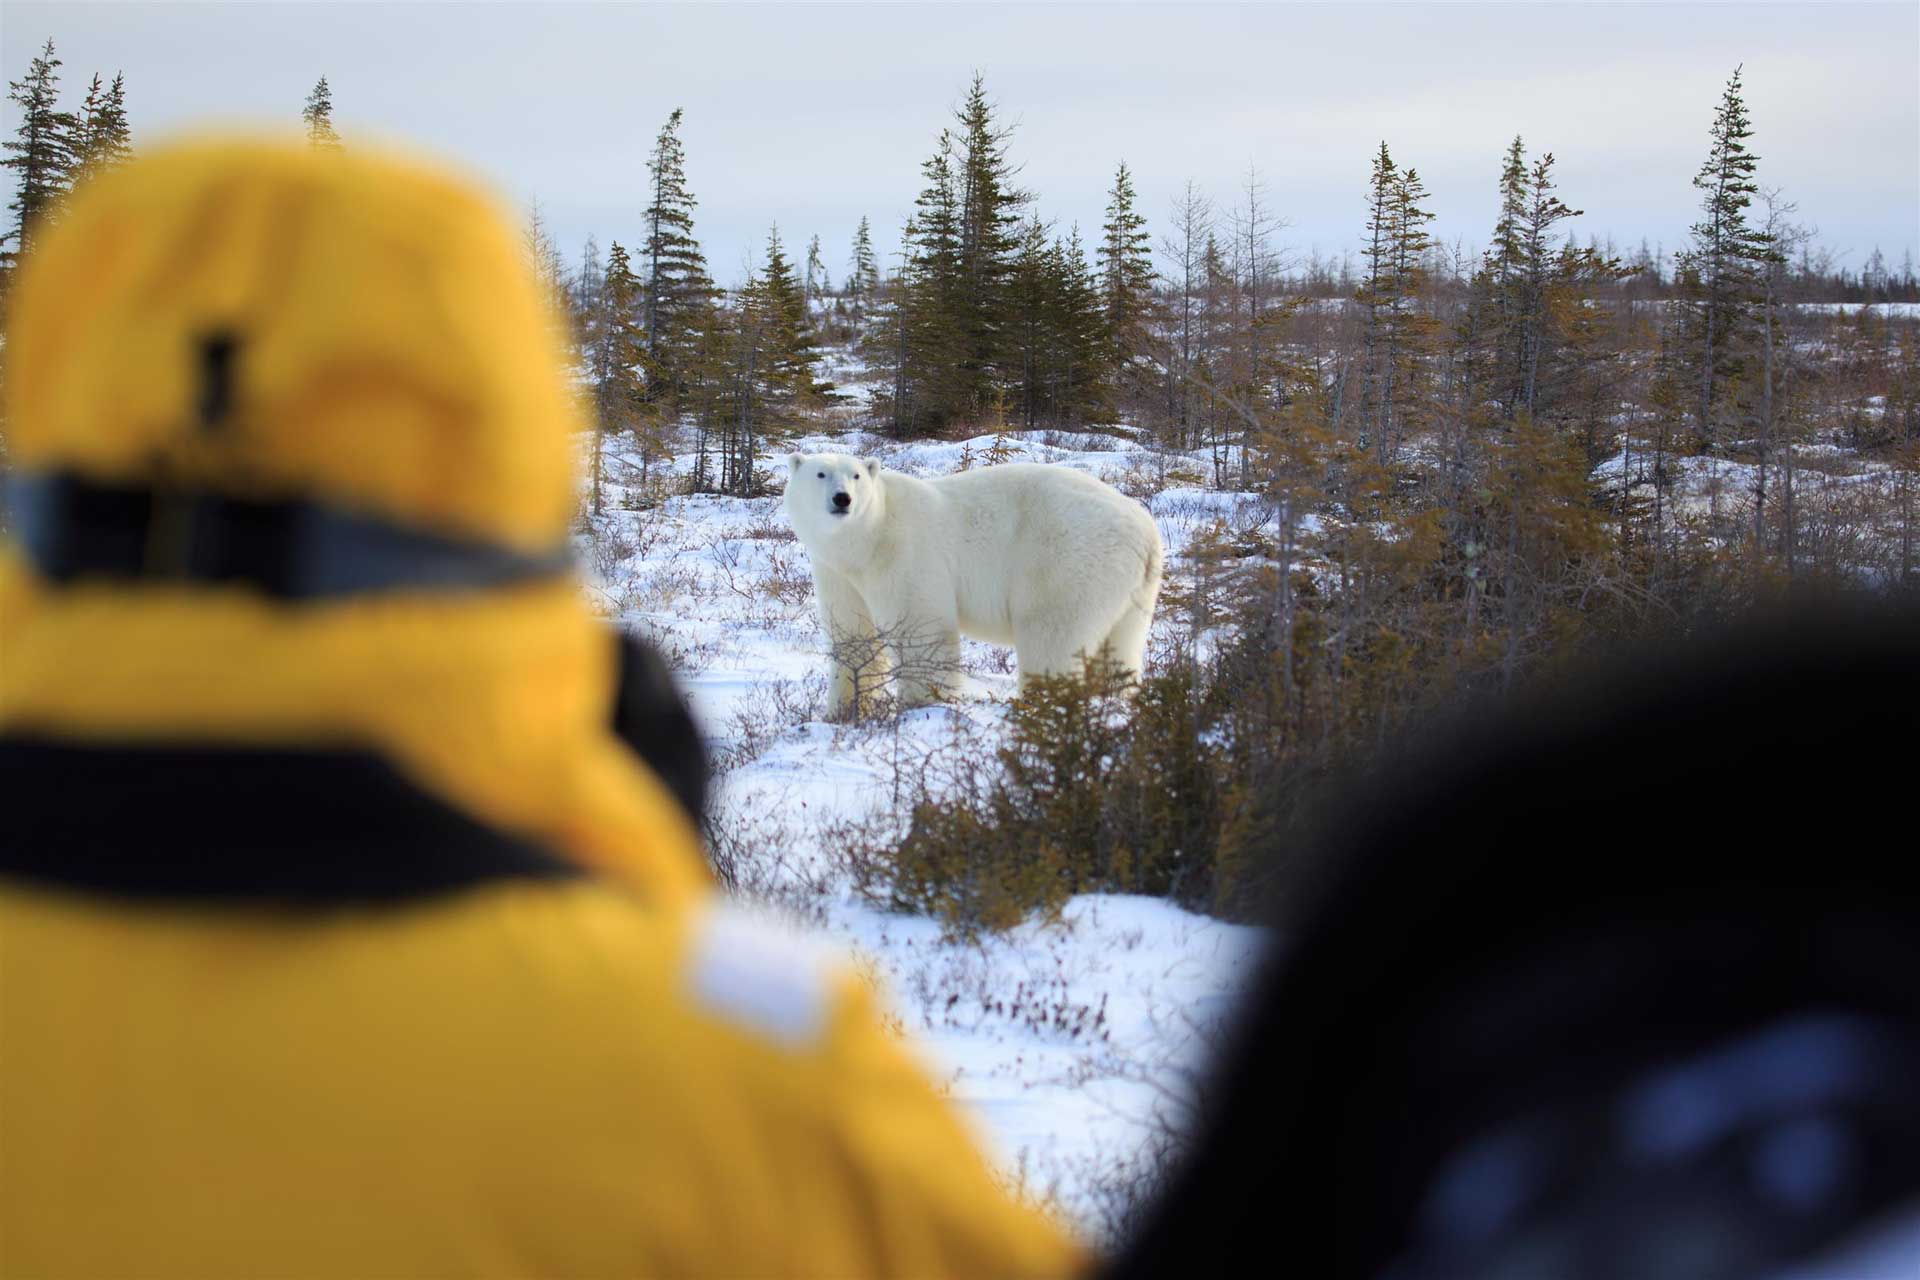 Ethical wildlife viewing at Churchill Wild. Beatrice Jorns photo. Great Ice Bear Adventure. Dymond Lake Ecolodge.